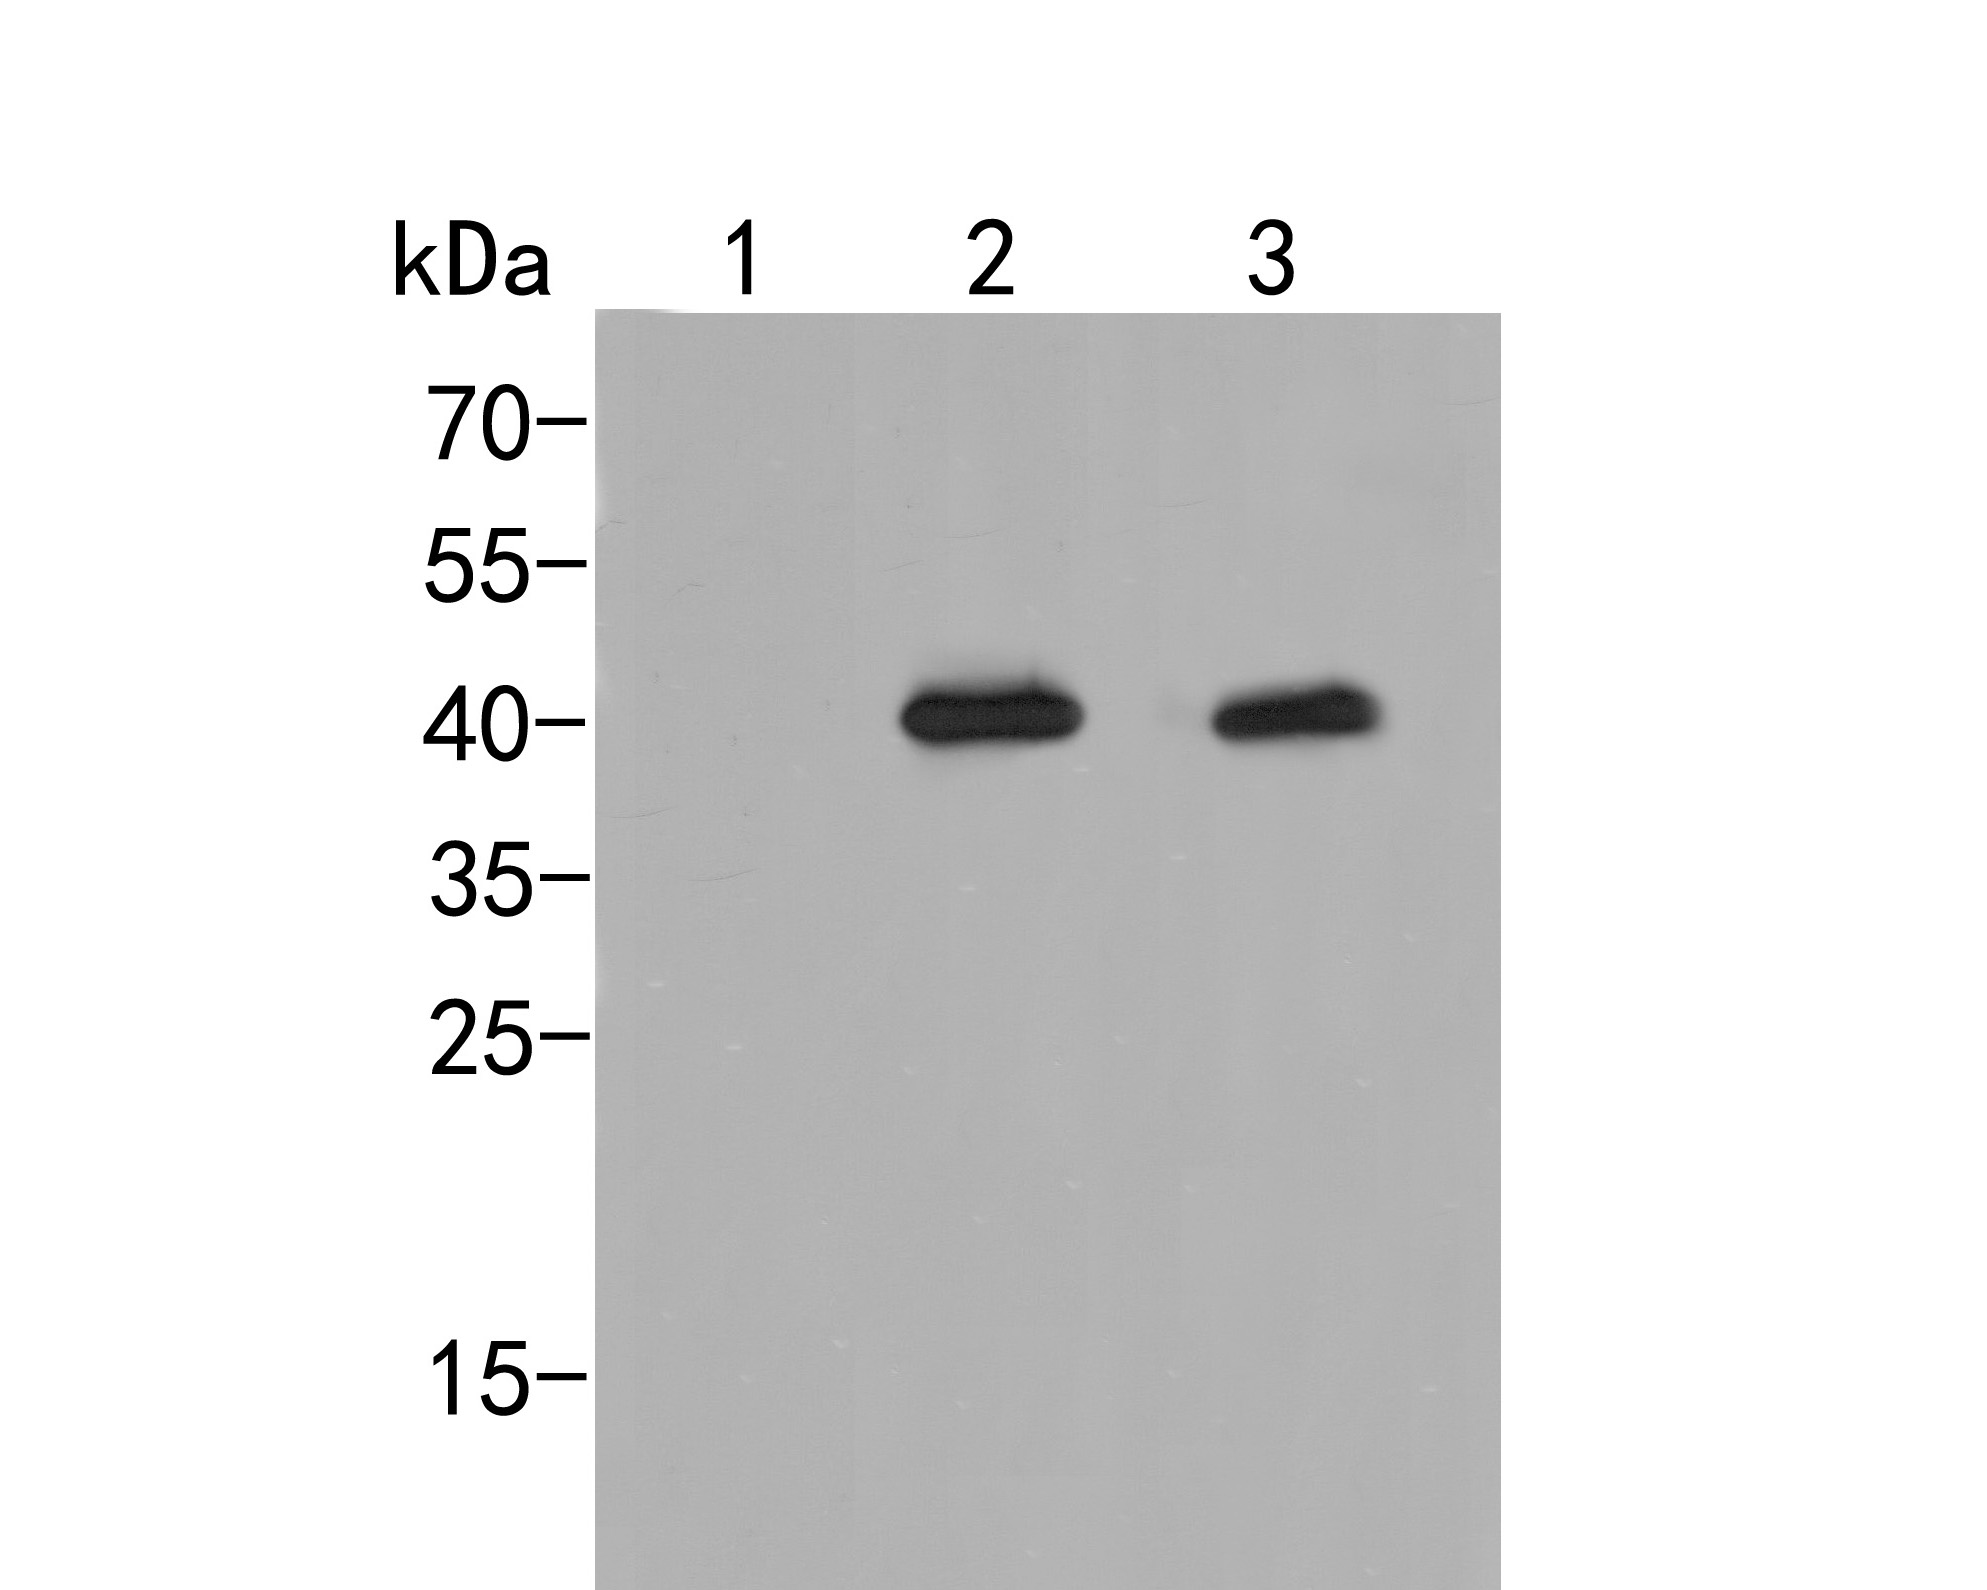 Western blot analysis of Phospho-P38  (Thr180 + Tyr182) on different lysates. Proteins were transferred to a PVDF membrane and blocked with 5% BSA in PBS for 1 hour at room temperature. The primary antibody (ER2001-52, 1/1000) was used in 5% BSA at room temperature for 2 hours. Goat Anti-Rabbit IgG - HRP Secondary Antibody (HA1001) at 1:5,000 dilution was used for 1 hour at room temperature.<br />
Positive control: <br />
Lane 1: Hela cell lysate, untreated <br />
Lane 2: Hela cell lysate, treated with UV for 40 minutes<br />
Lane 3: Hela cell lysate, treated with anisomycin at 250 ng/ml for 30 minutes